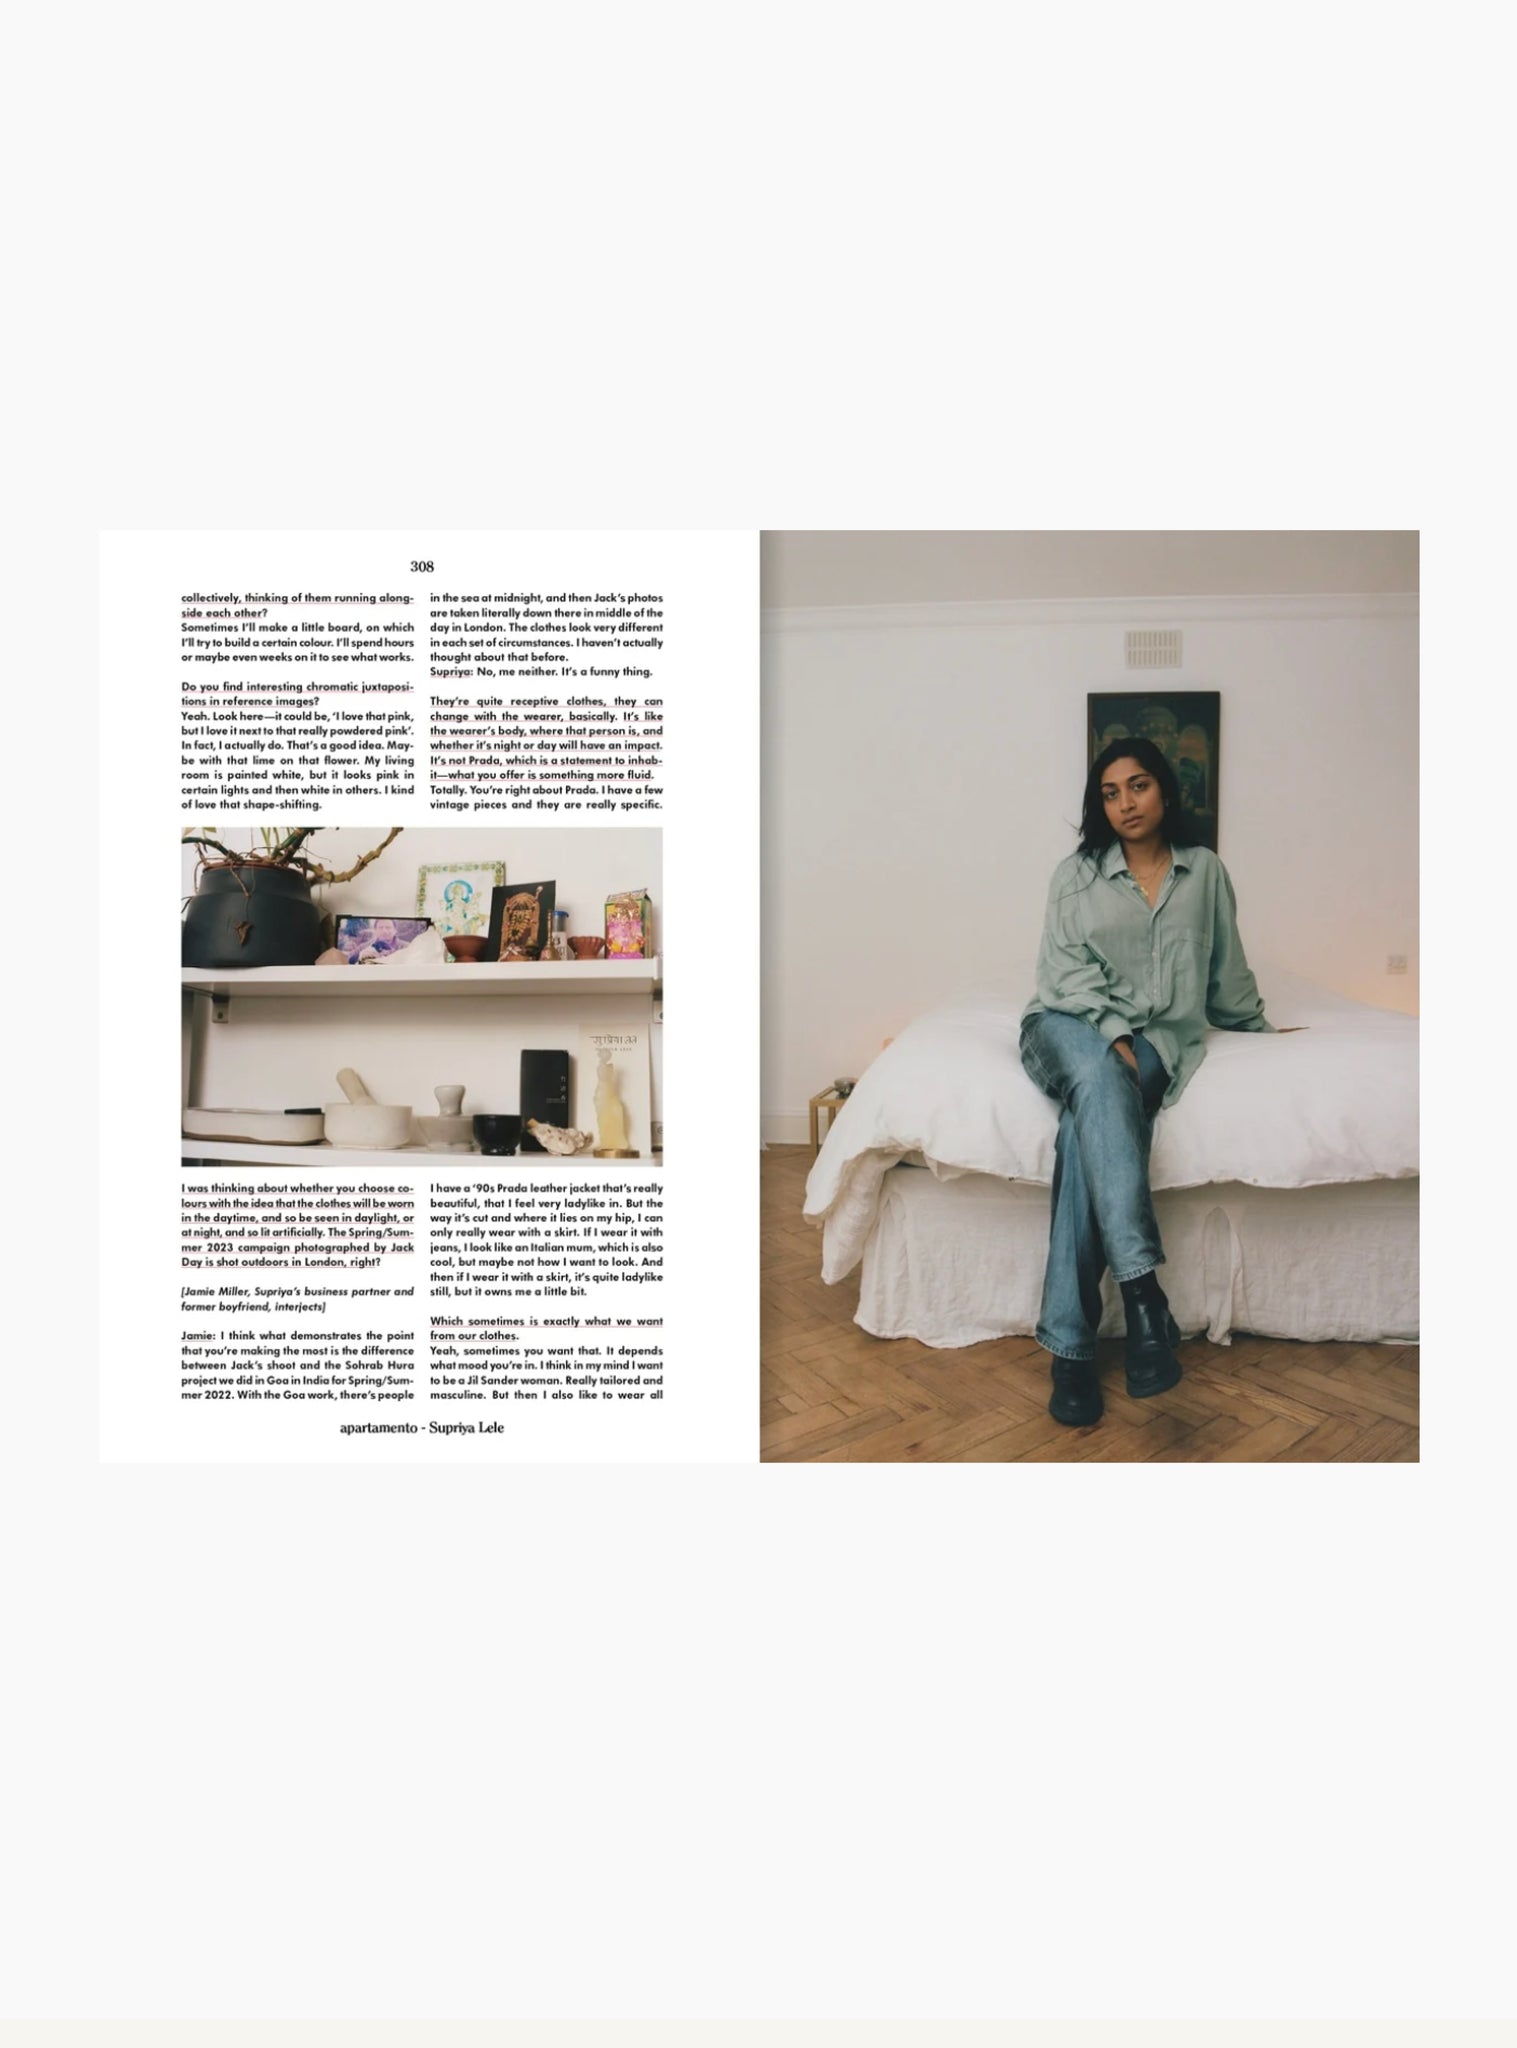 Apartamento - From our interview with the English fashion designer